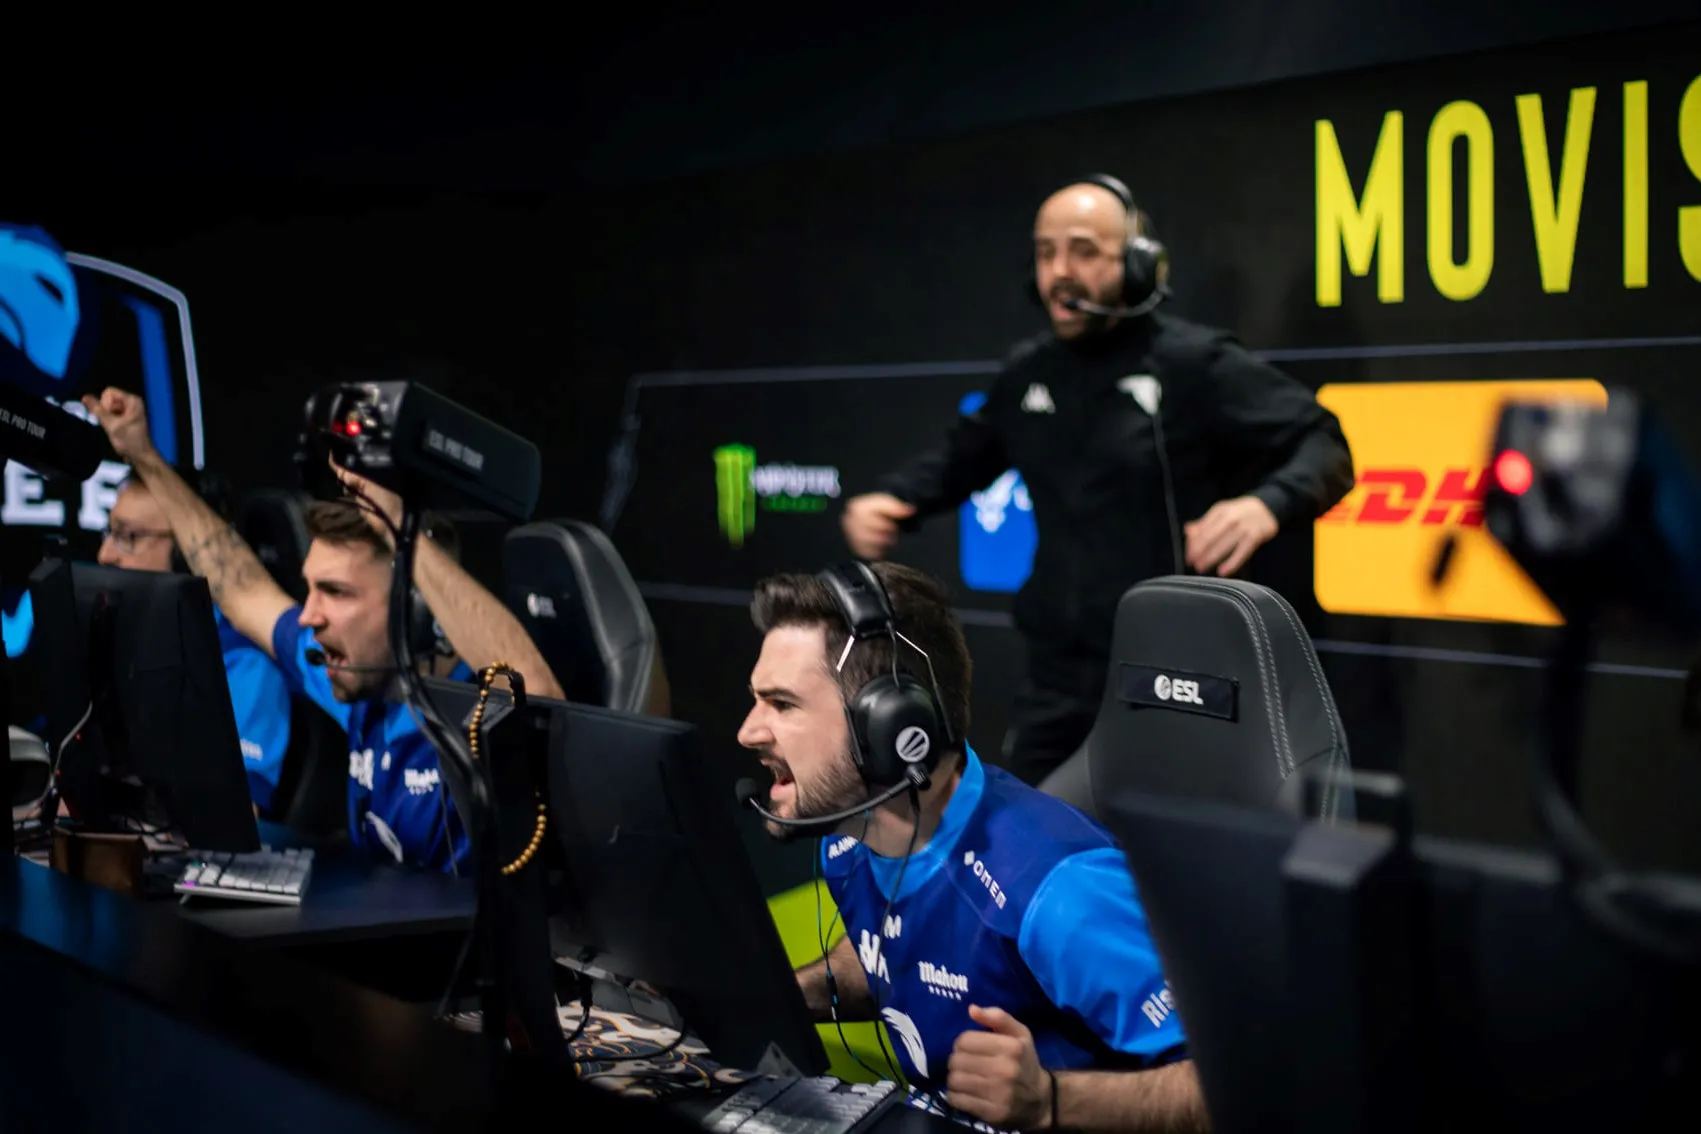 Movistar Riders secure the spot in the playoff of ESL Pro League